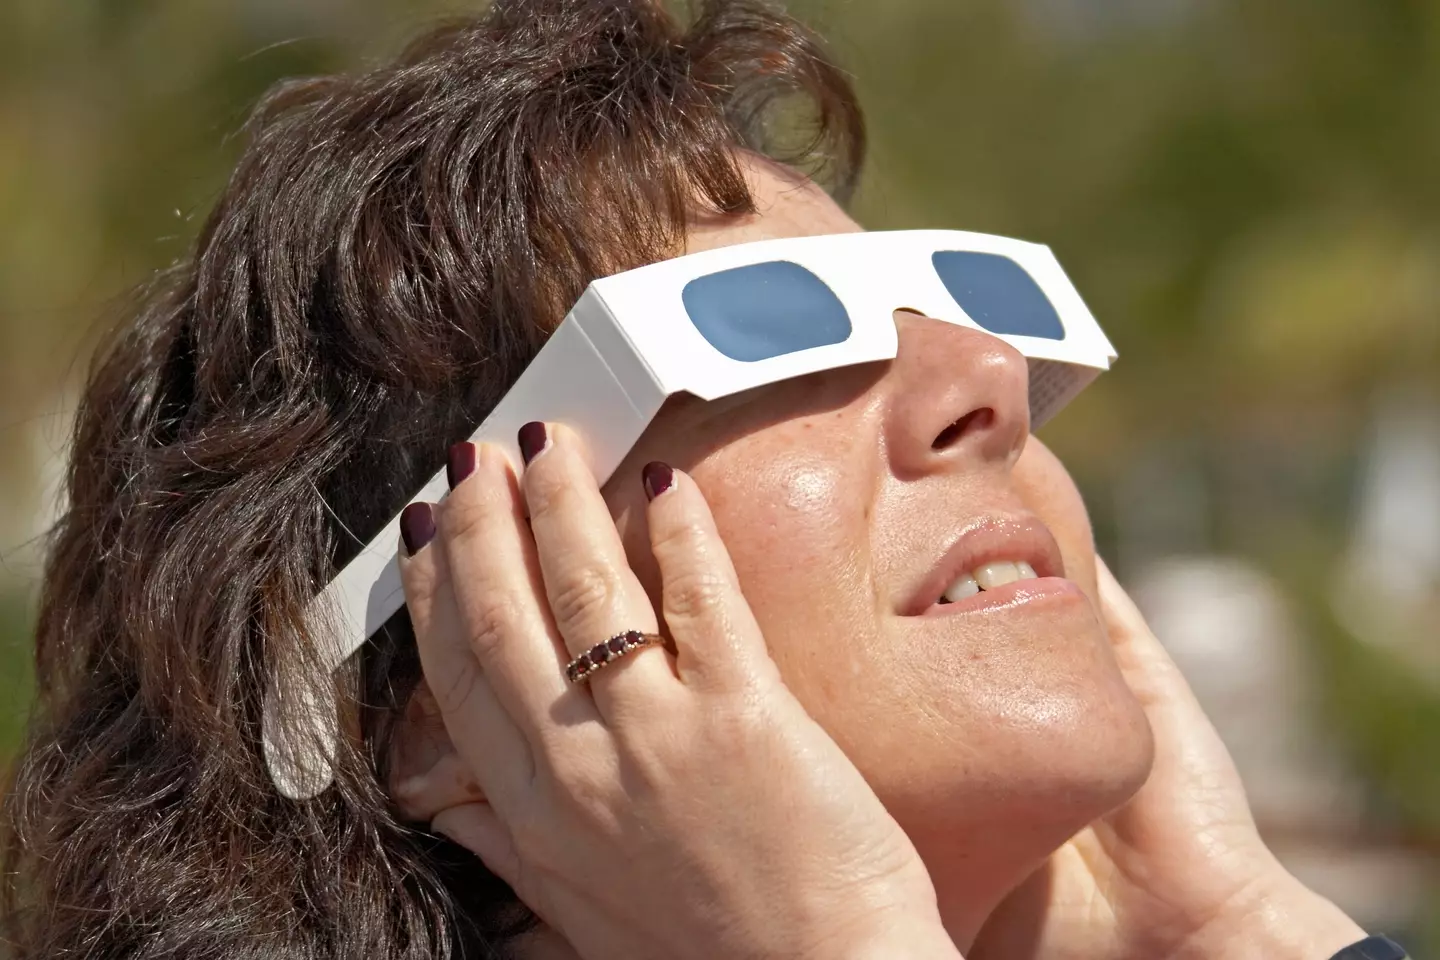 Solar eclipse glasses are essential to view the event. Getty Stock Image